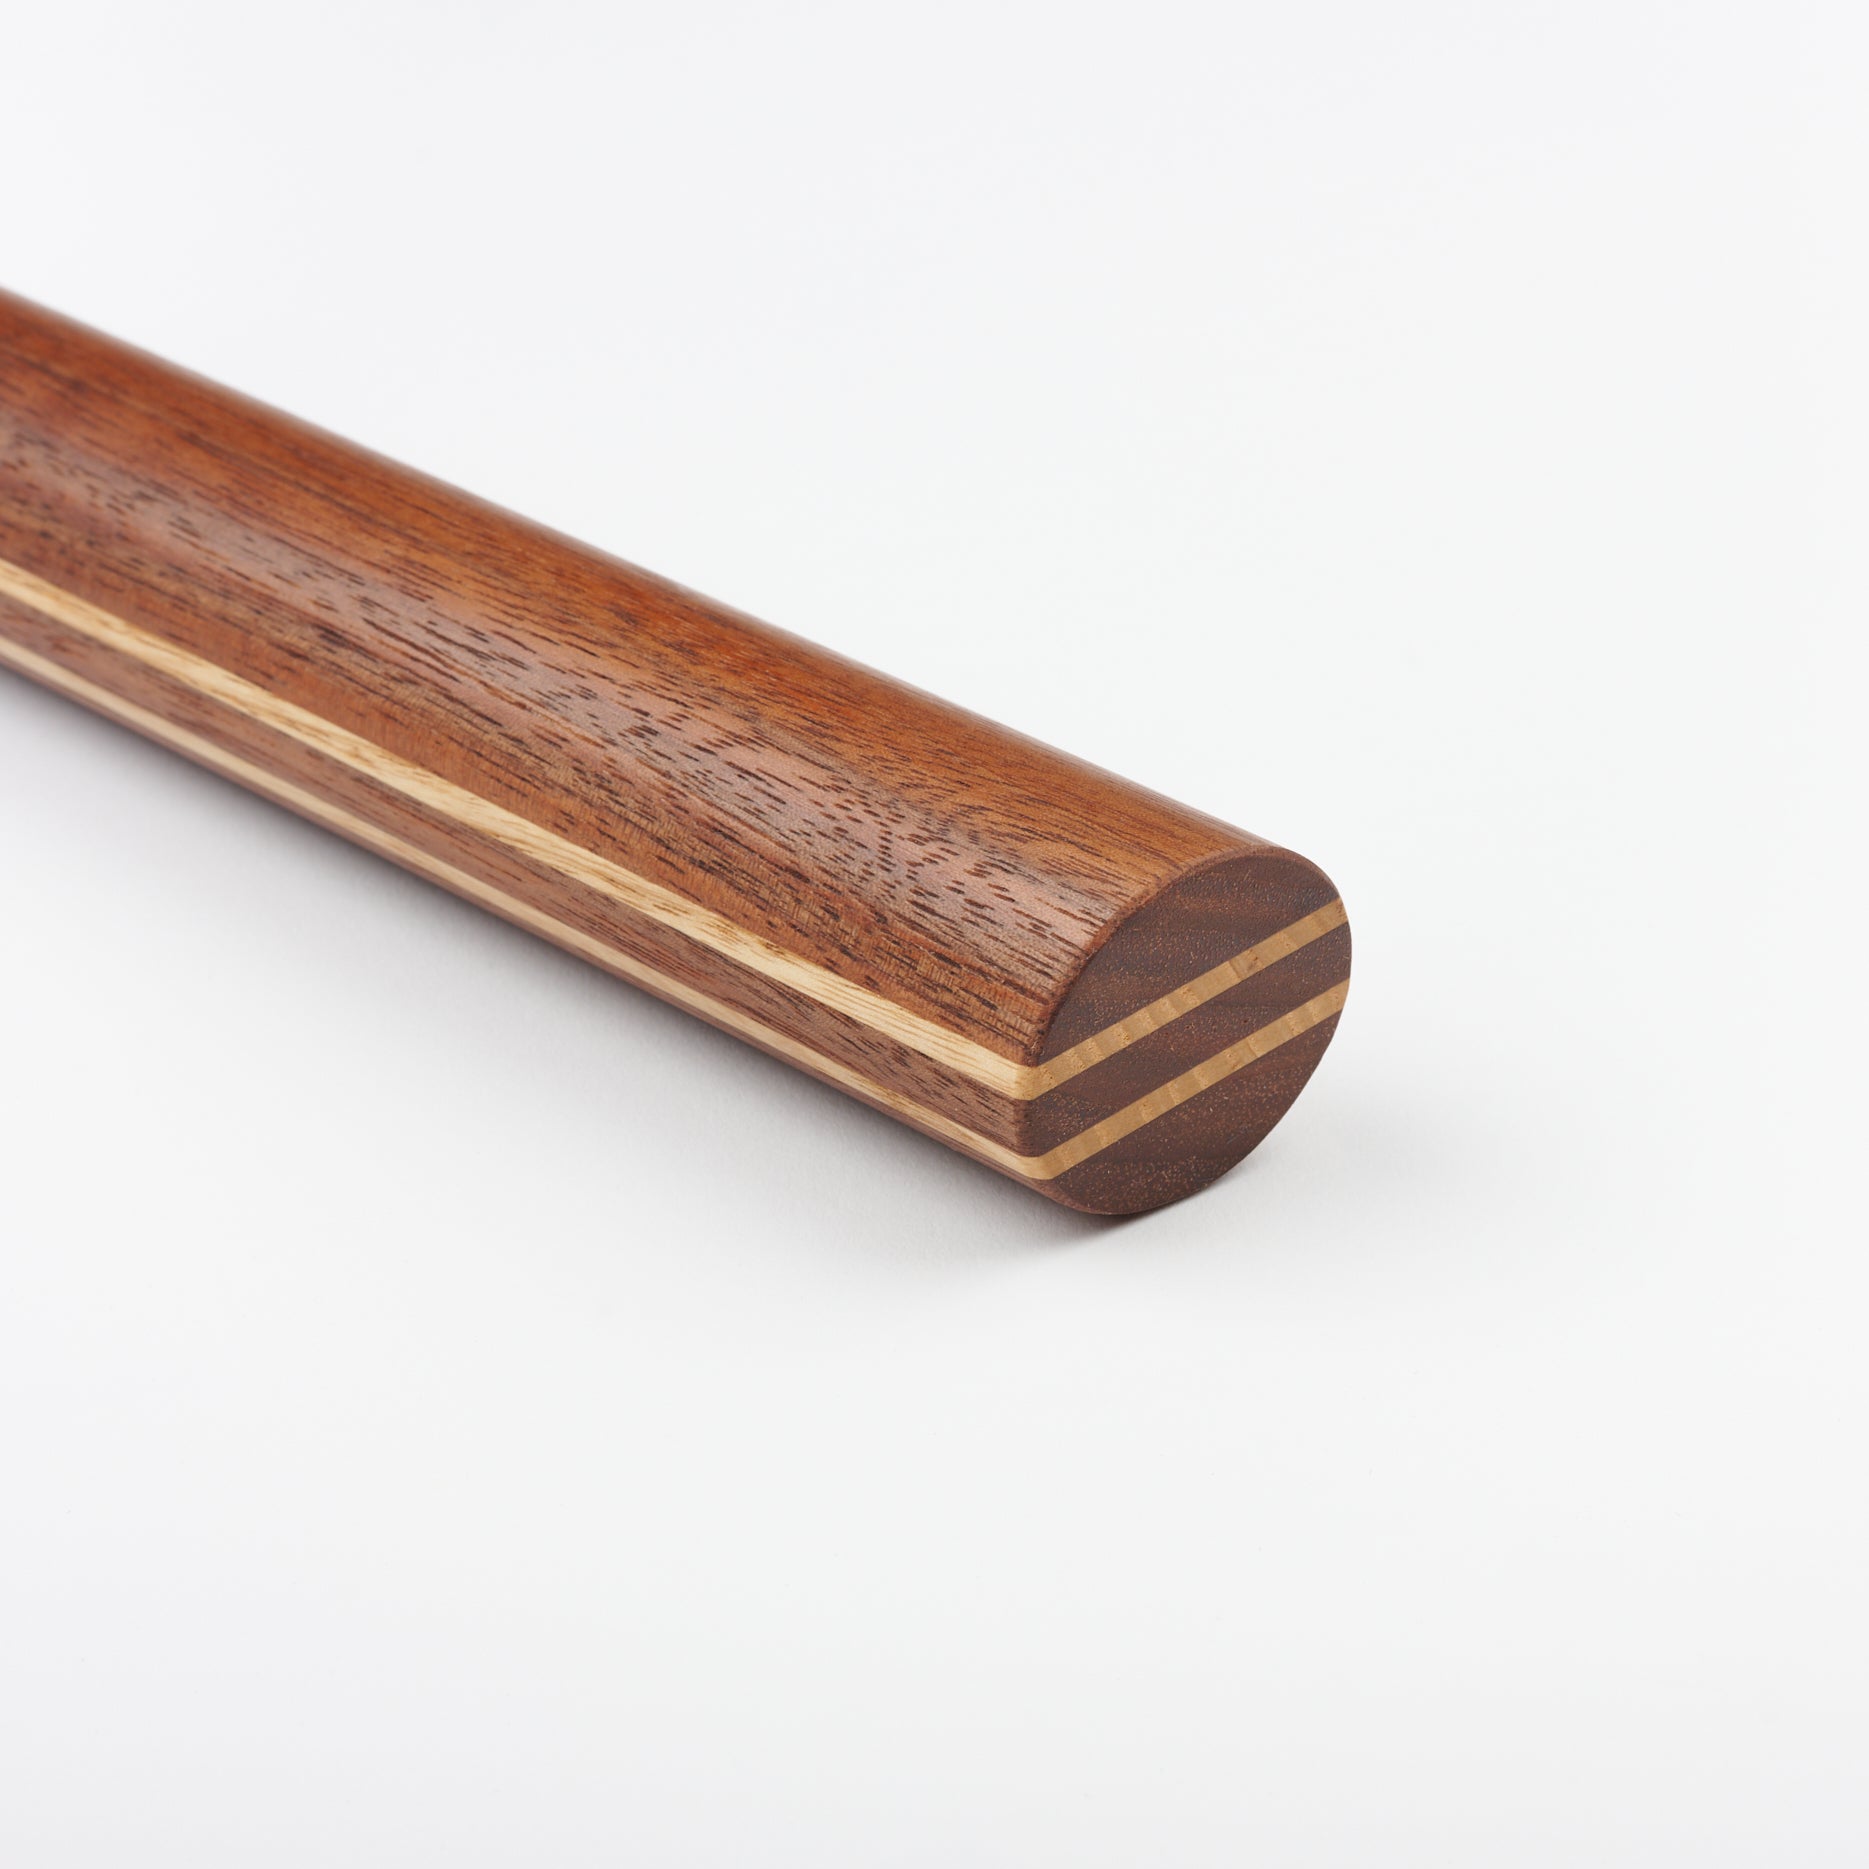 Close up view of the end of a limited edition hand turned wooden rolling pin with inlaid double stripe lines